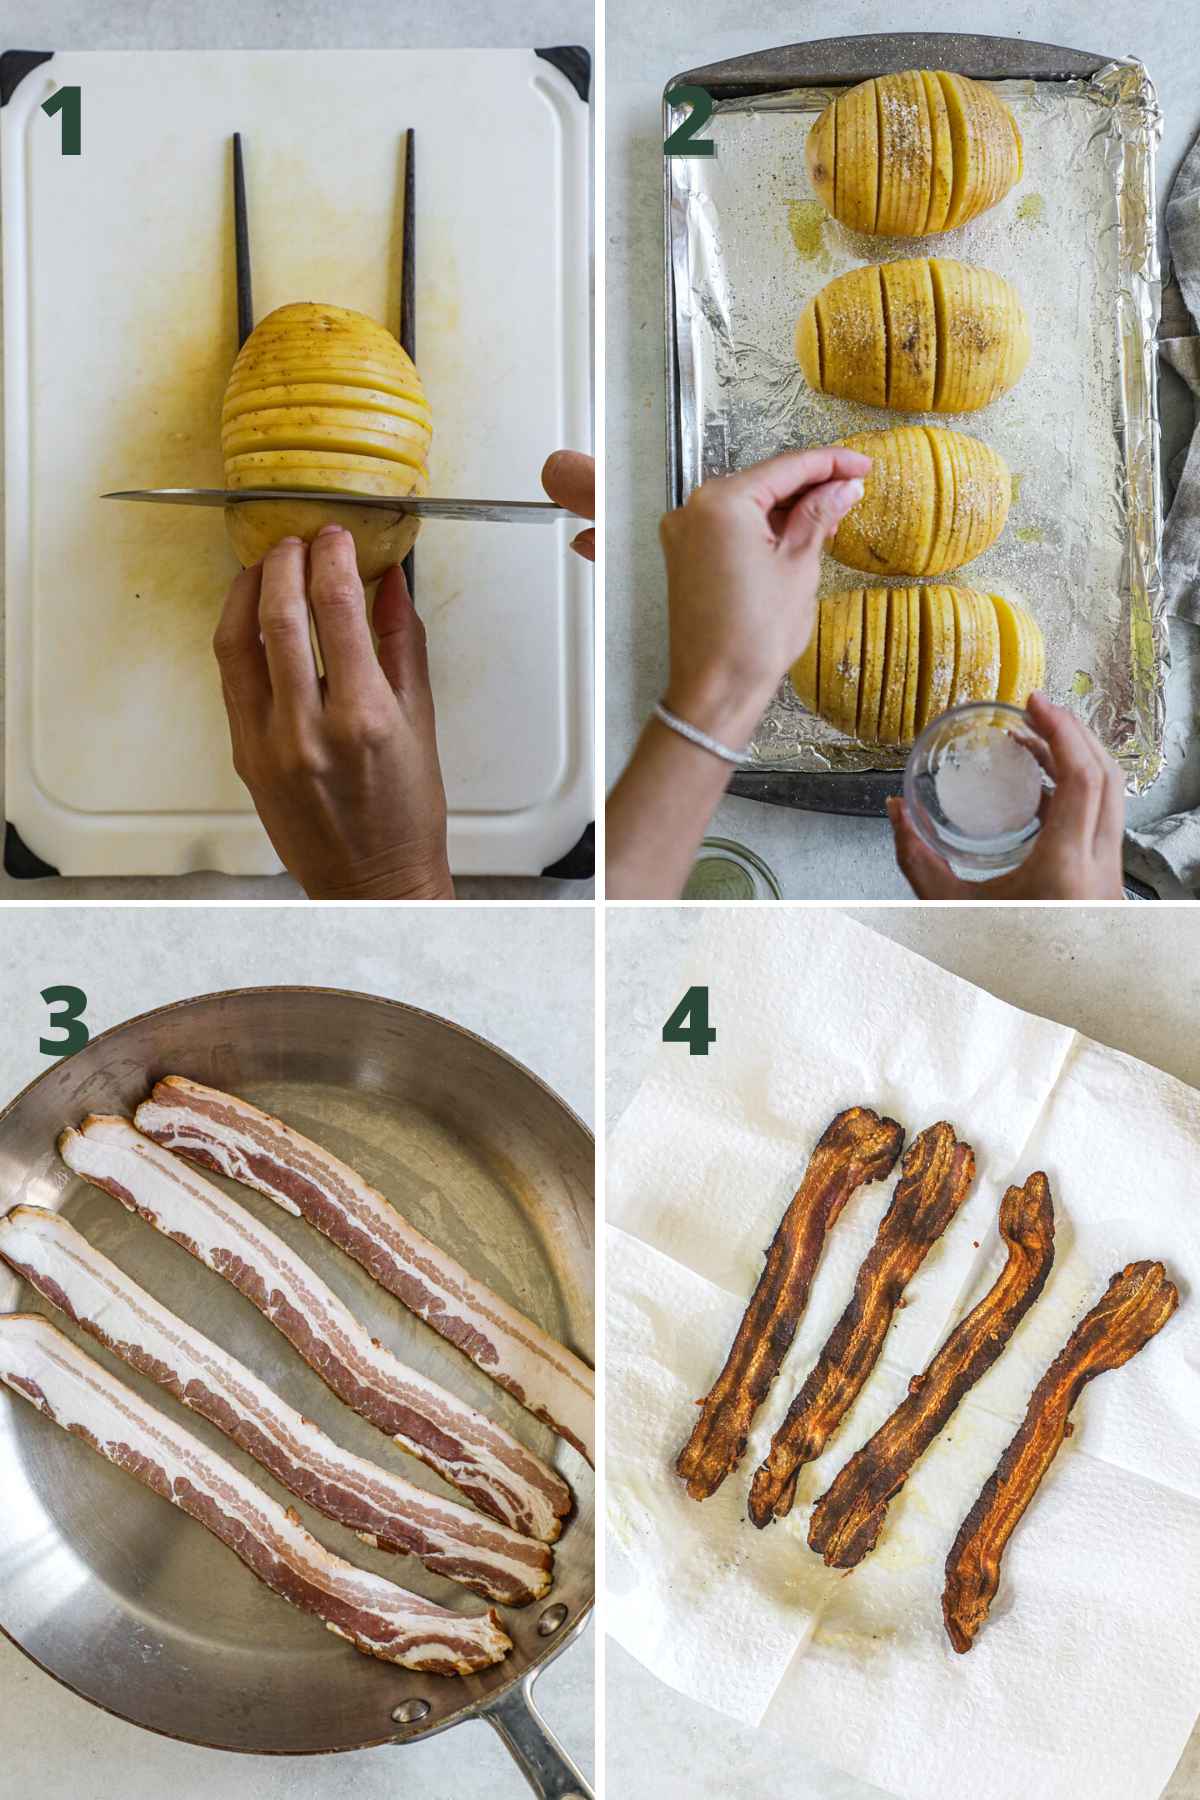 Steps to make bacon cheddar hasselback potatoes; slice, season, and bake potatoes; make bacon in a pan for topping and transfer to paper towel.